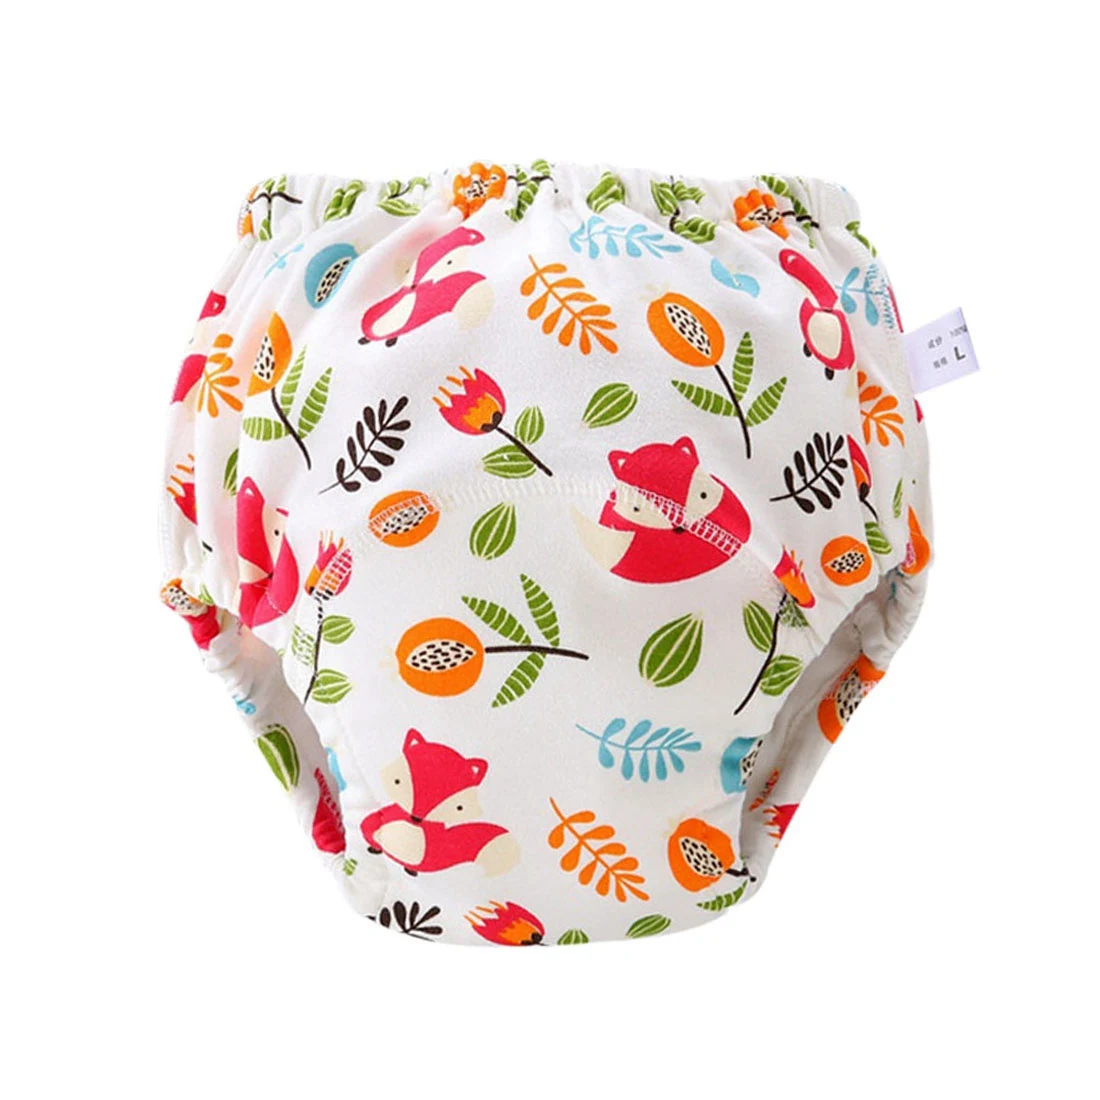 

Bverionant Washable Baby Cloth Diapers Reusable Babys Breath Diaper For Girls And Boys, Multi color